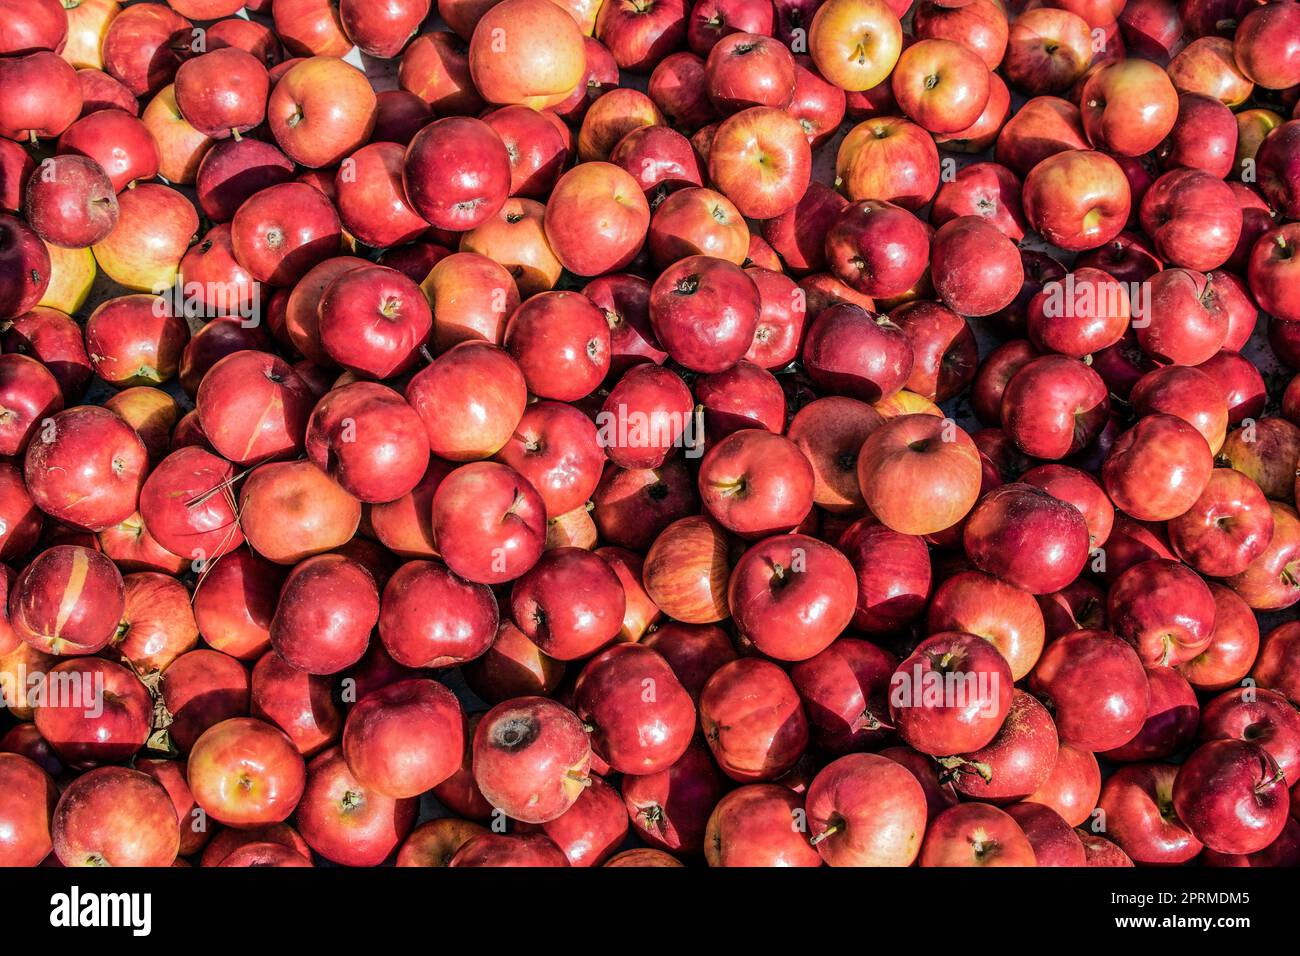 Bunch of red apples, fresh harvest Stock Photo